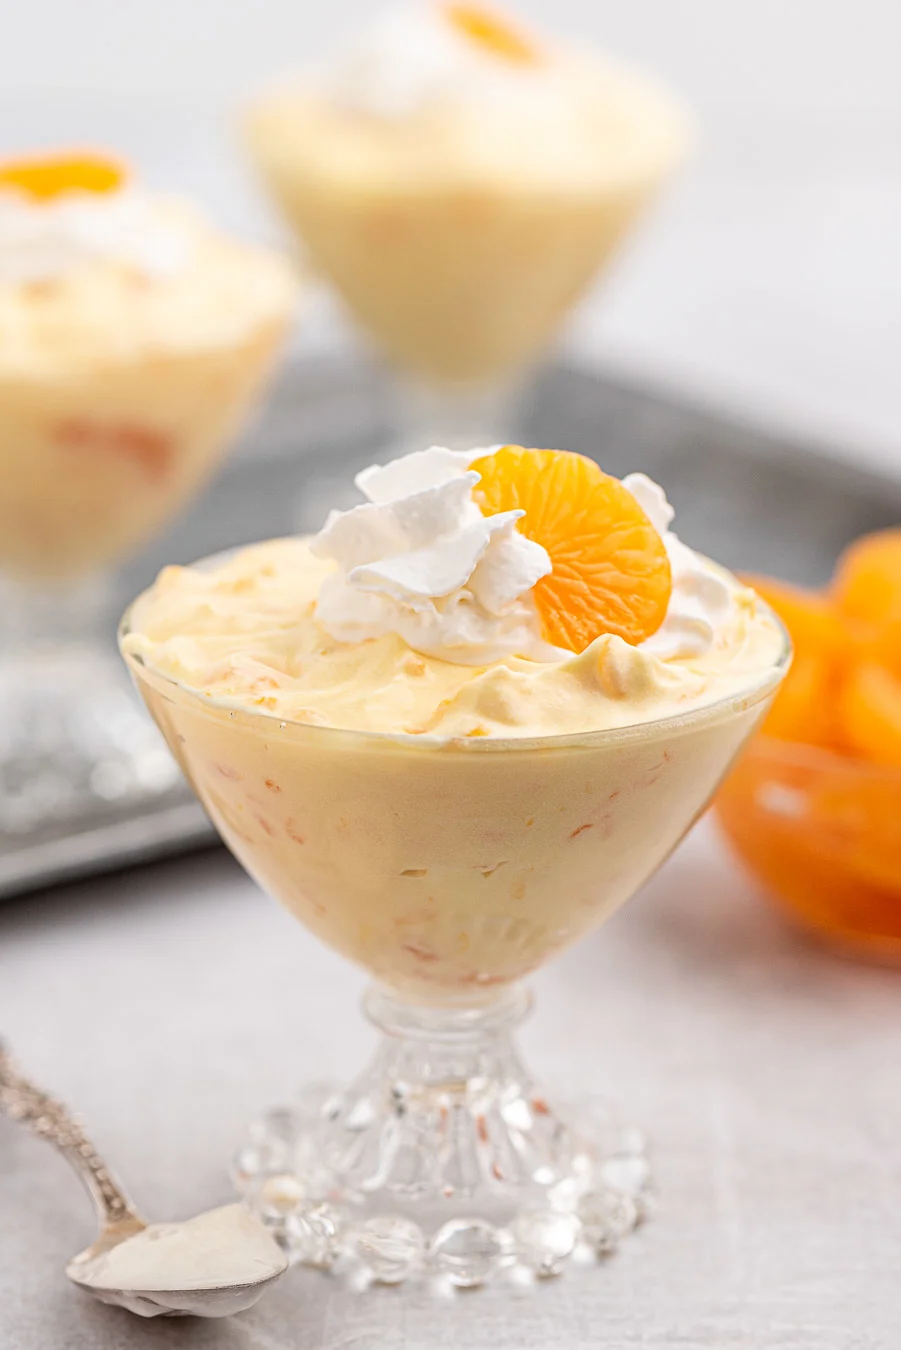 mandarin orange dessert with just three ingredients, served in vintage serving dishes. Topped with whipped cream and canned mandarin oranges.